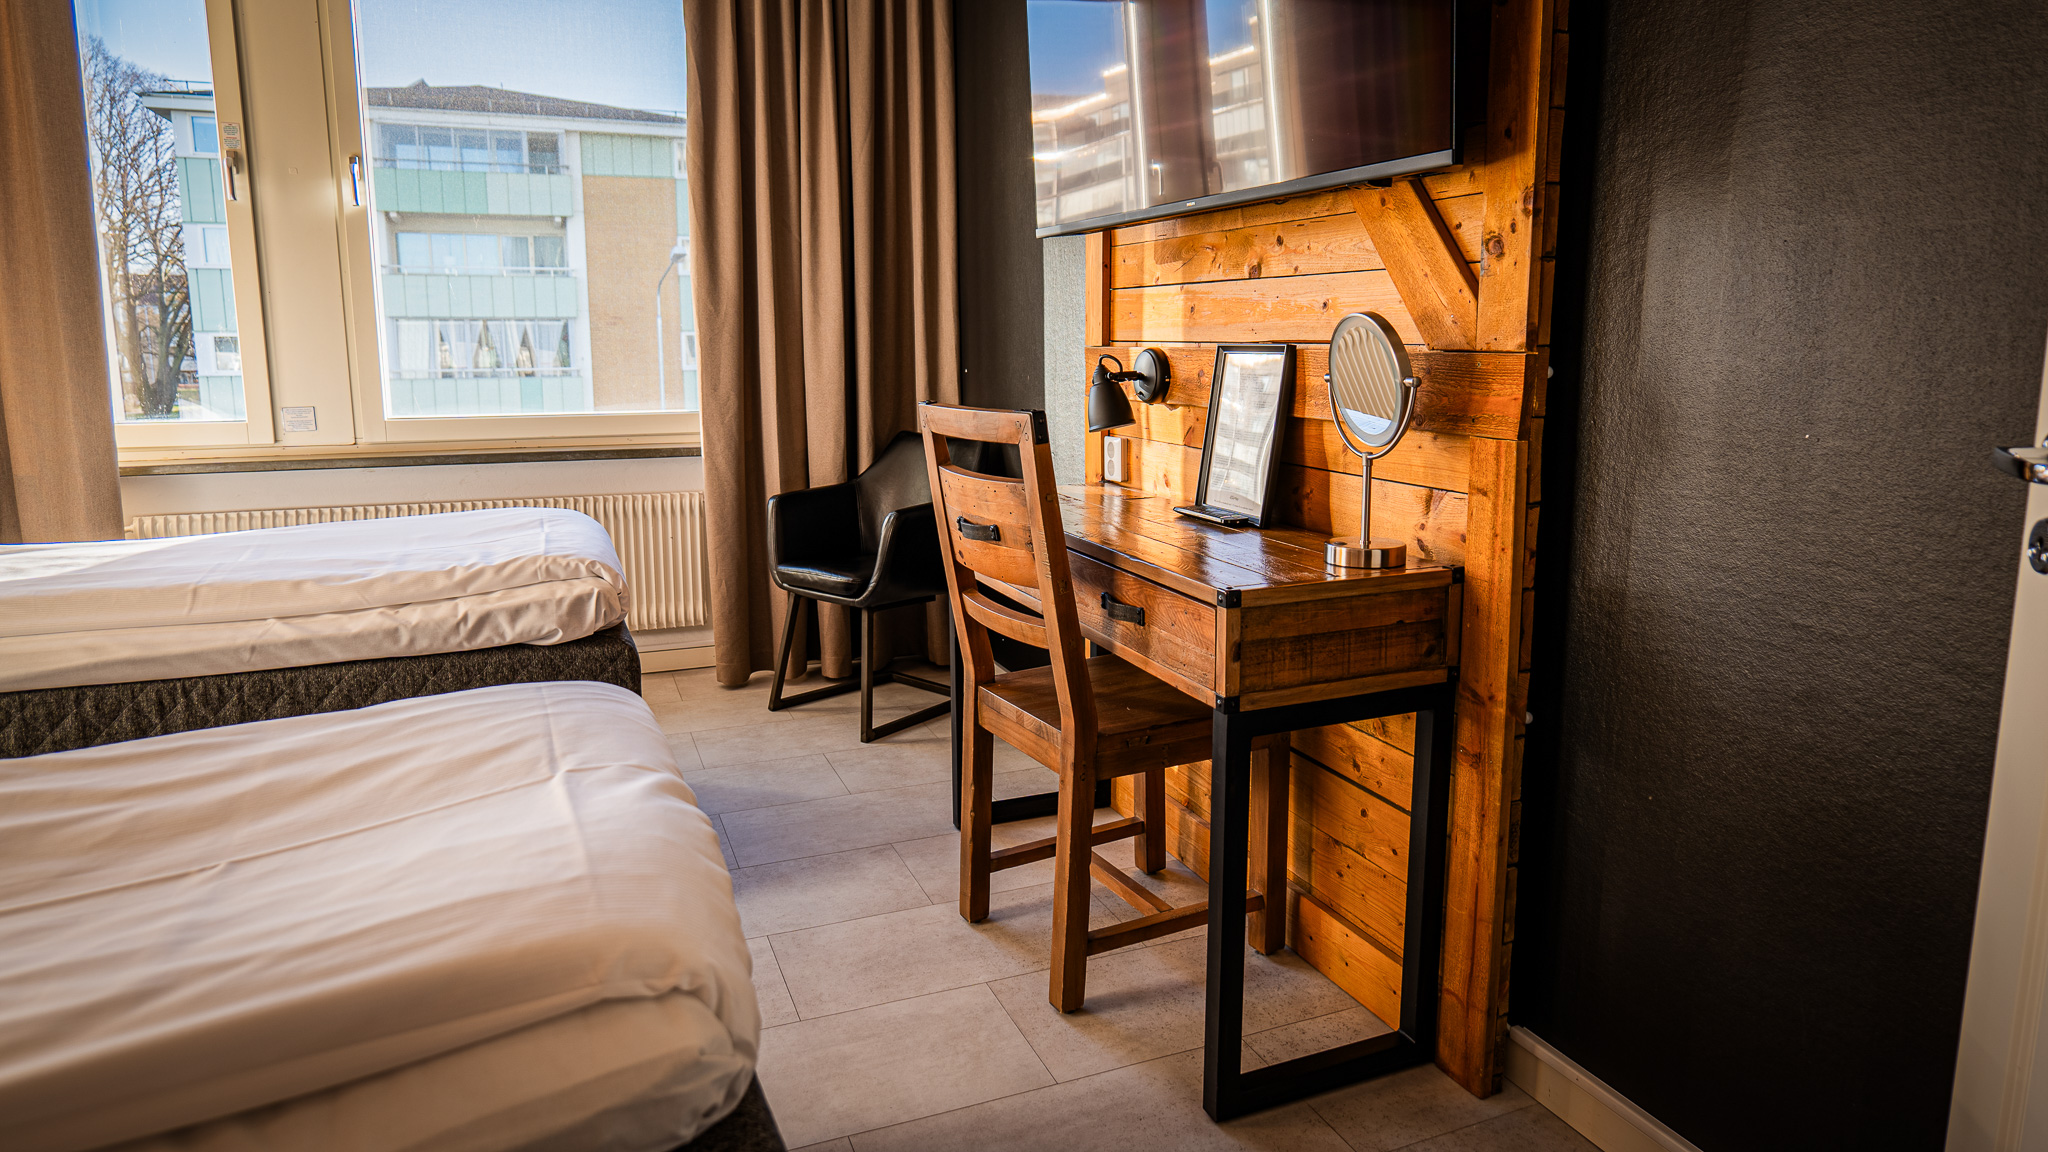 TomaszPikus 5 - Your Ultimate Guide to Sweden - LikeSweden.com - Havshotellet - cozy stay in Malmö not only for the Valentine's Day